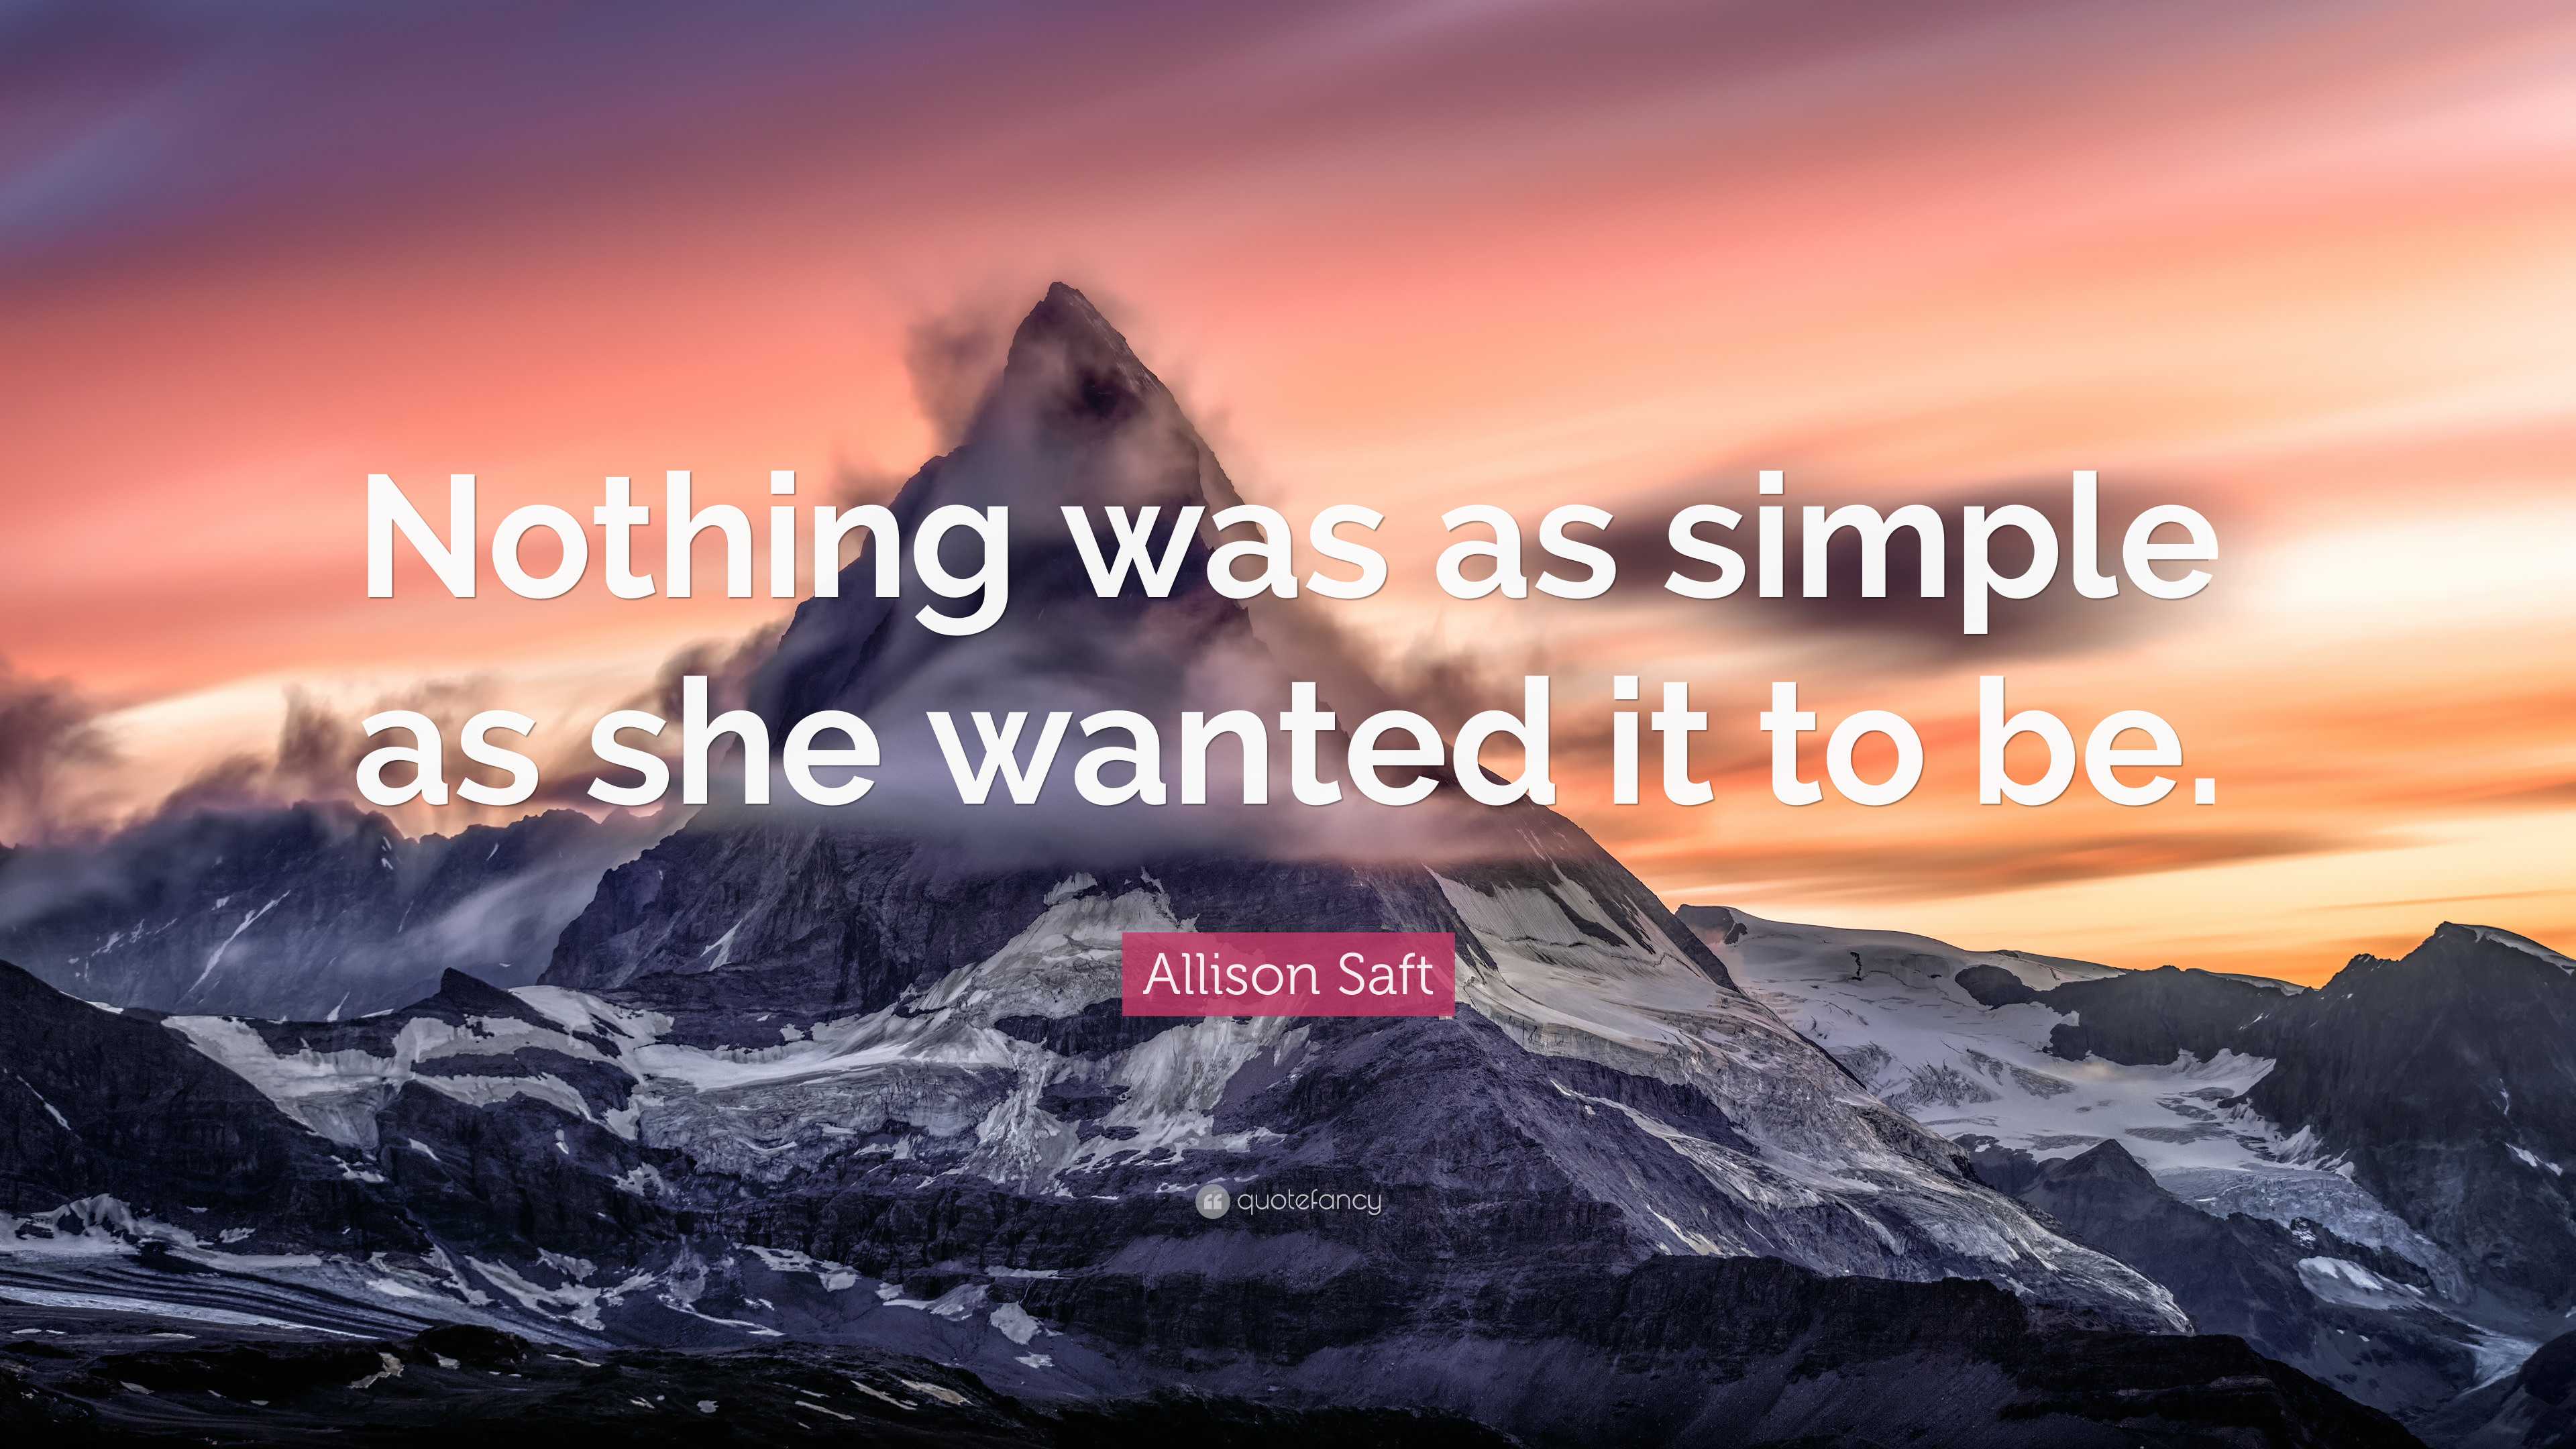 Allison Saft Quote: “Nothing was as simple as she wanted it to be.”